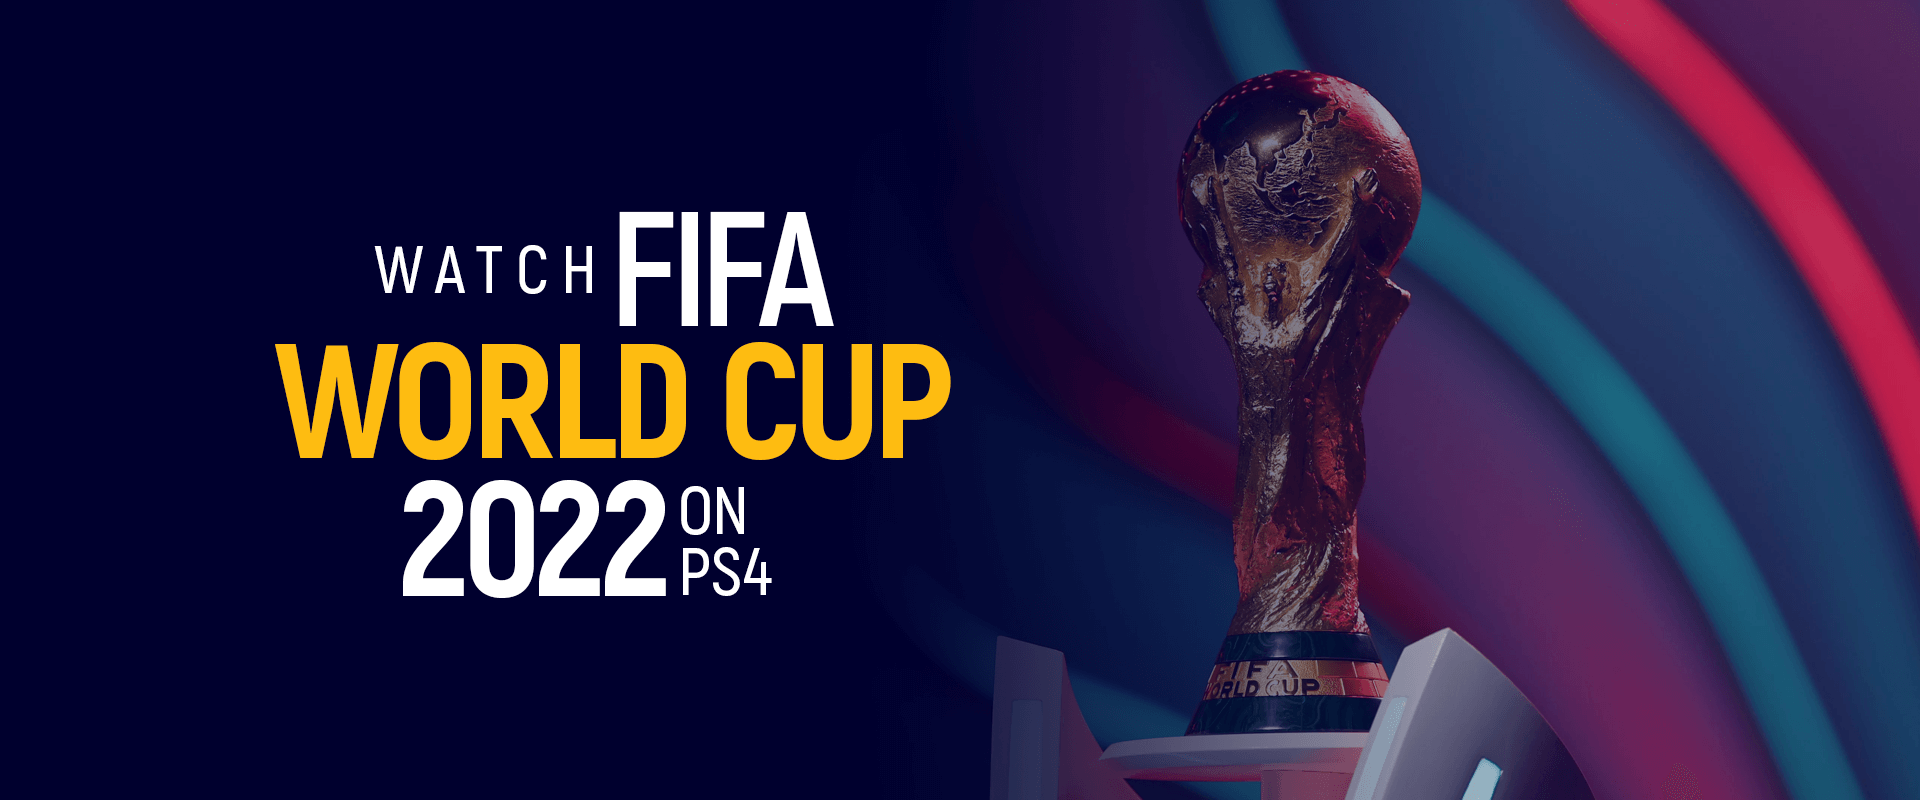 How to Watch FIFA World Cup 2022 On PS4